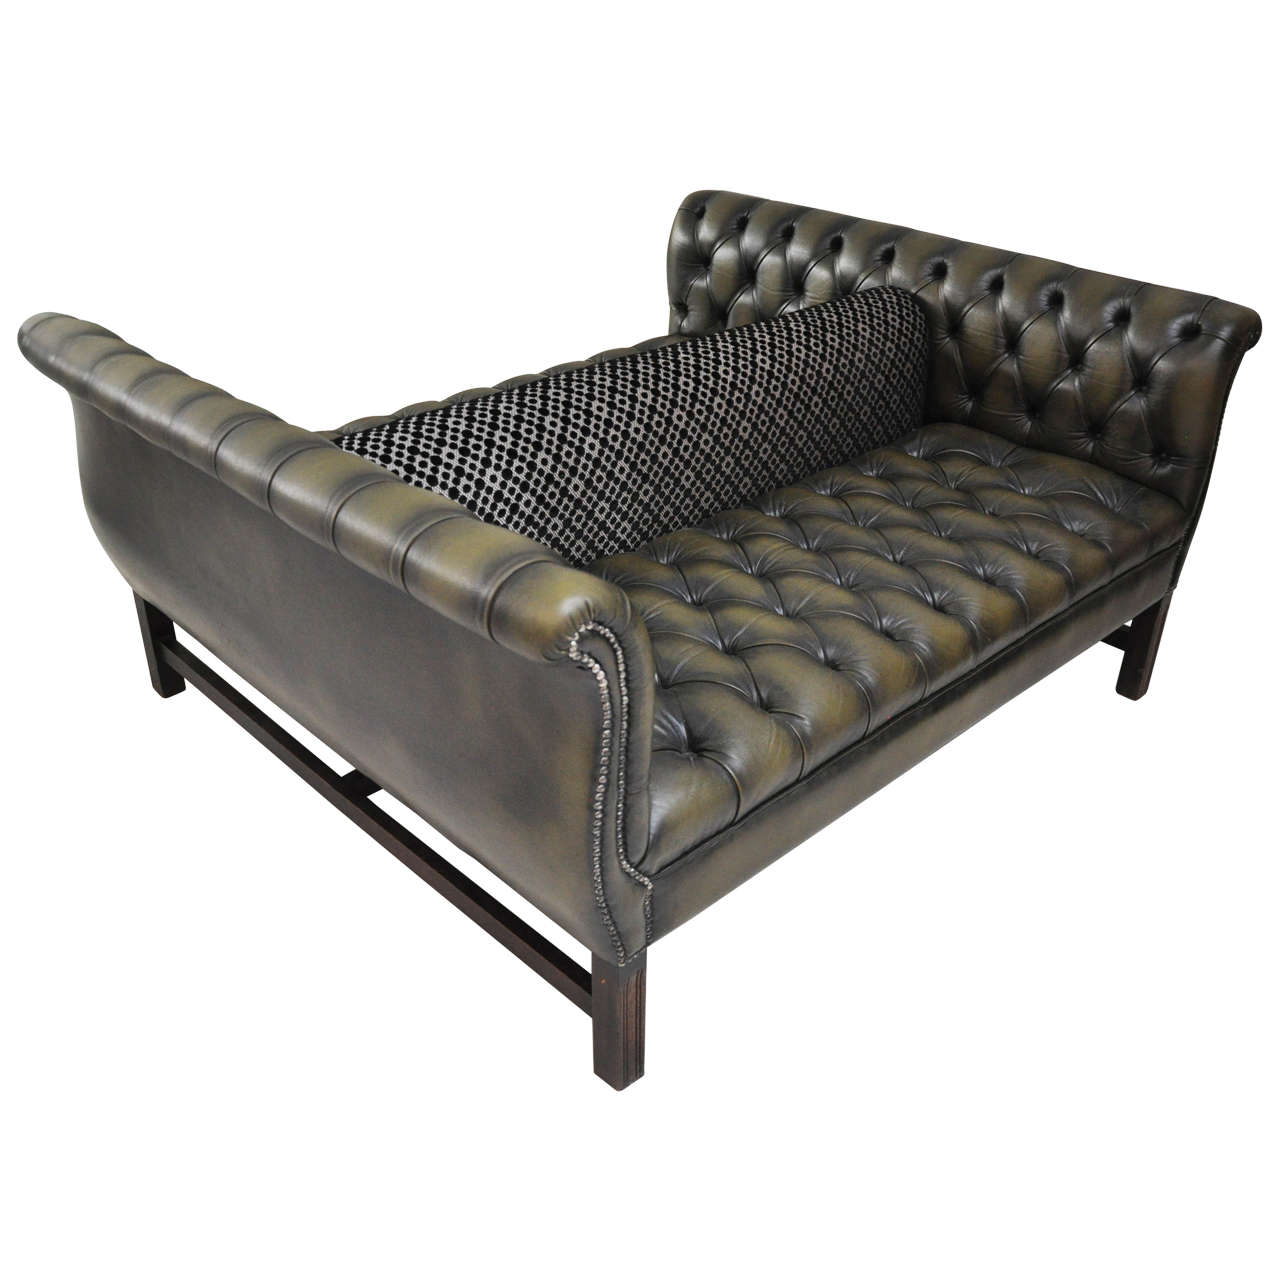 Double Sided Chesterfield Sofa At 1stdibs